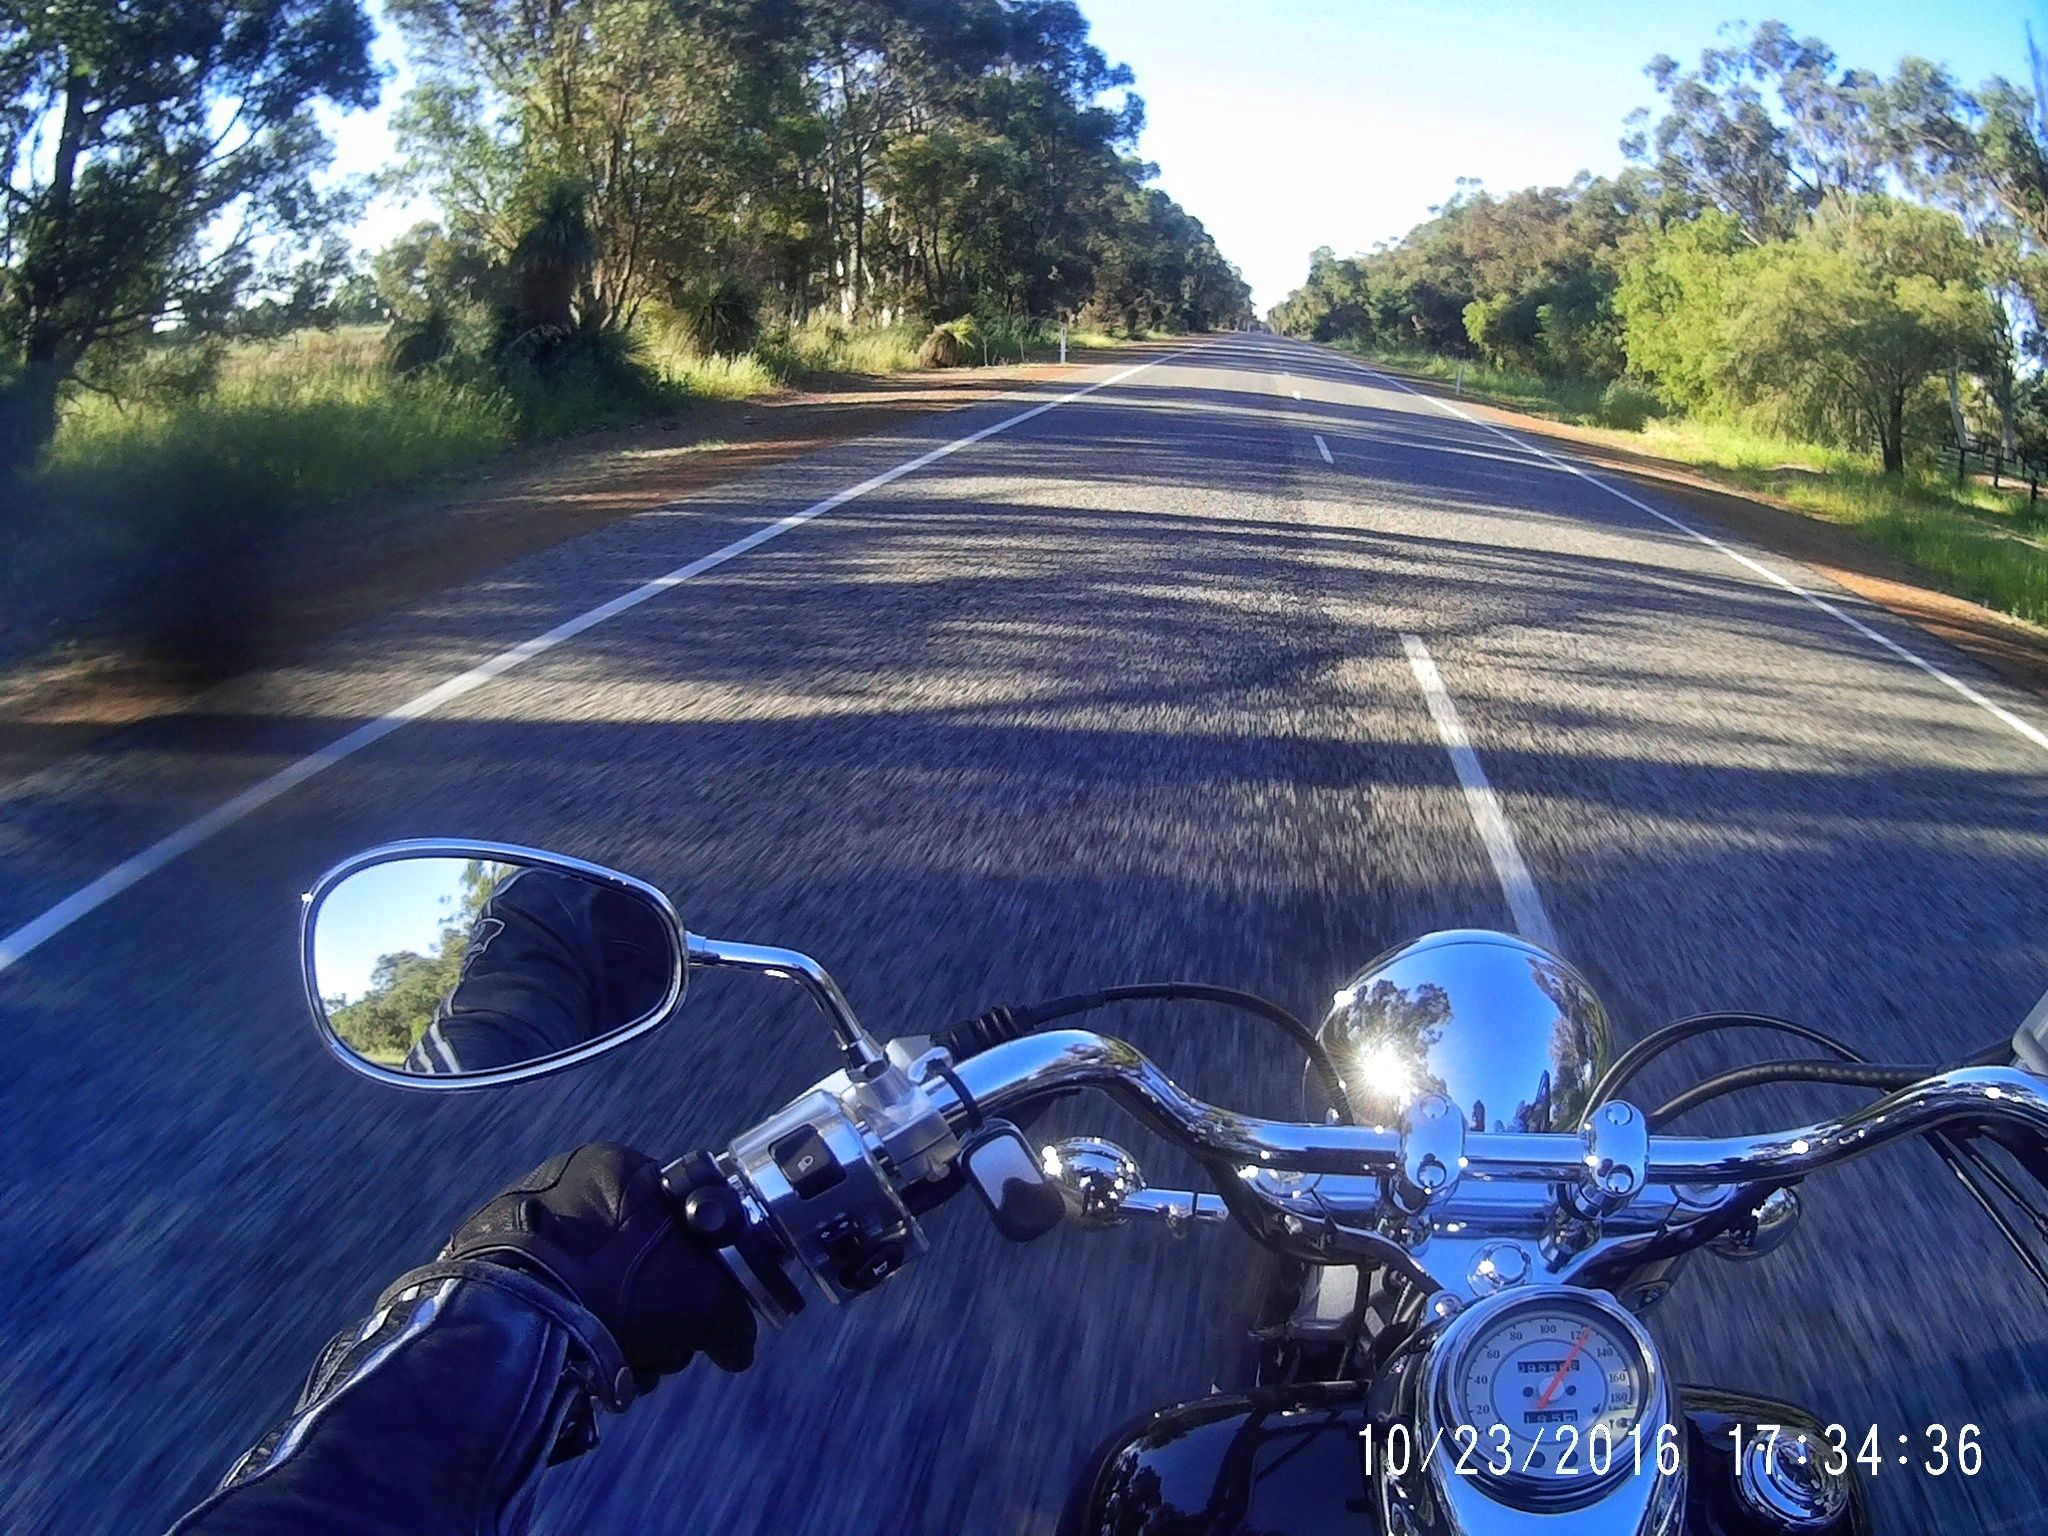 South West highway cruise.